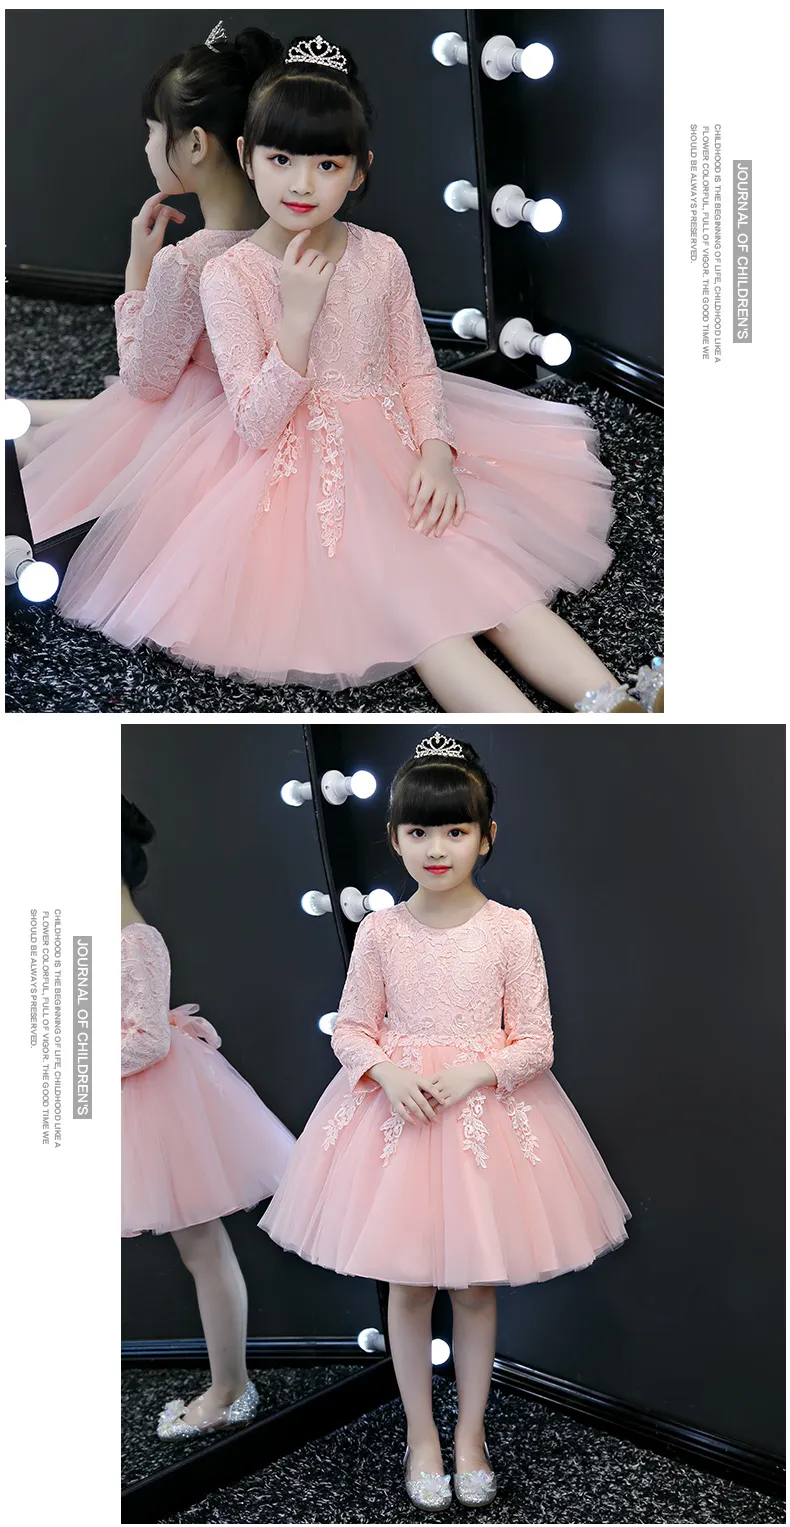 LINDA NEW Christening dresses payment link perfect 700 MNVN highest quality Free DHL&EMS For any two Pairs double box